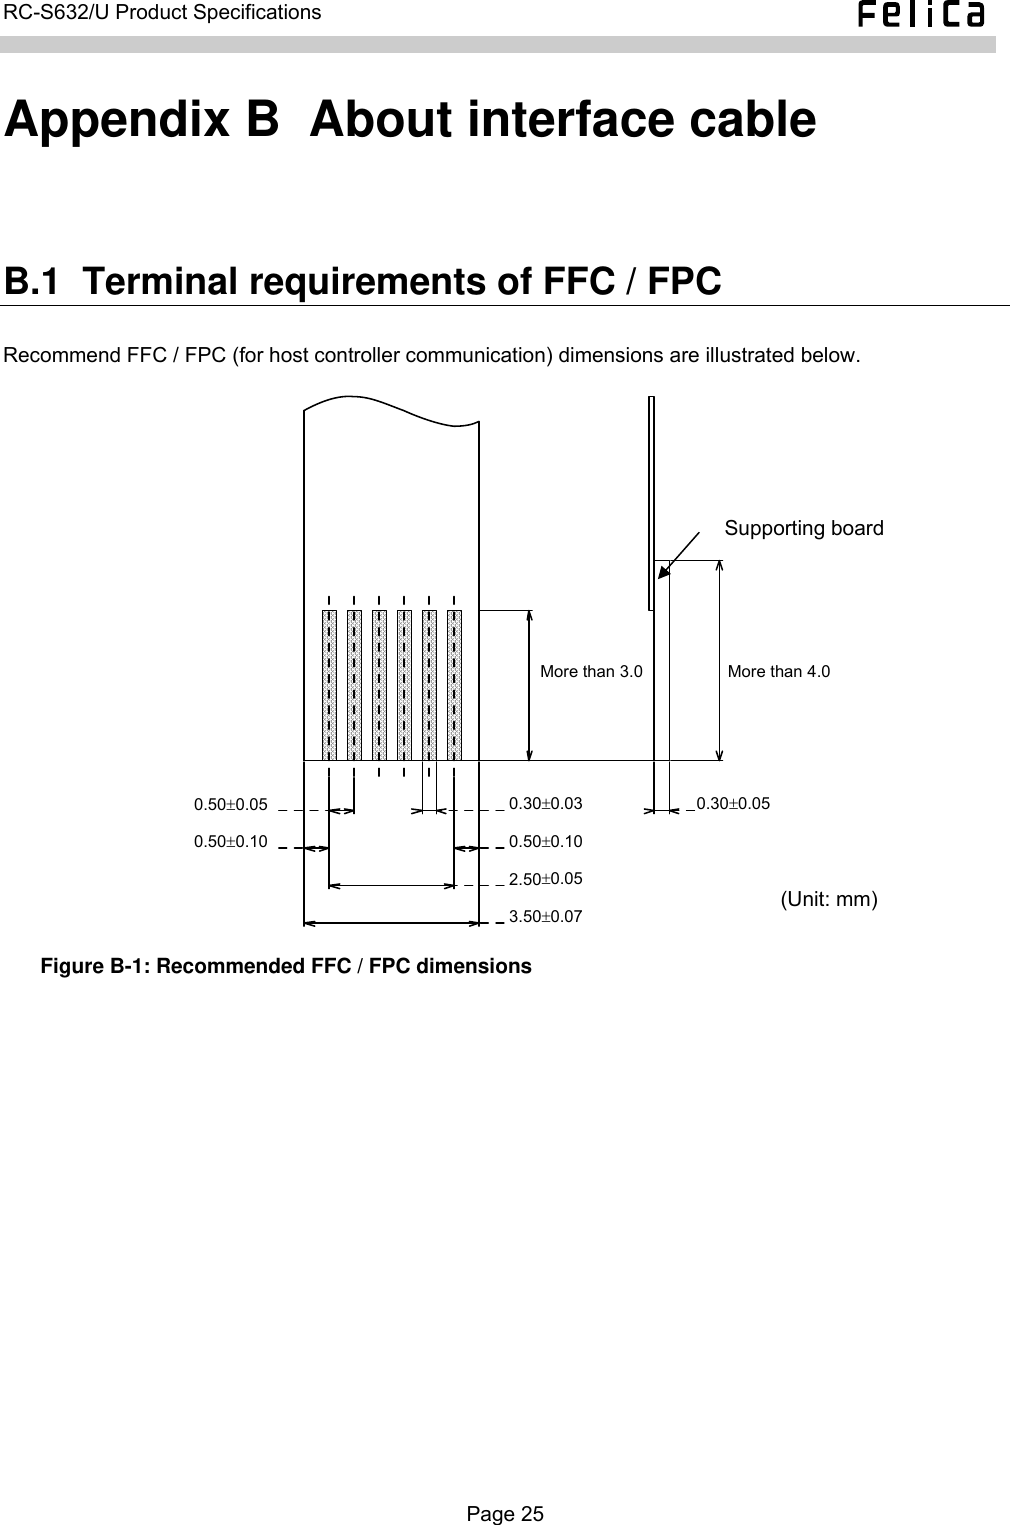   Page 25   RC-S632/U Product Specifications  Appendix B  About interface cable B.1  Terminal requirements of FFC / FPC Recommend FFC / FPC (for host controller communication) dimensions are illustrated below. (Unit: mm) Supporting board 3.50±0.07 More than 3.0 More than 4.0 0.30±0.05 0.30±0.03 0.50±0.10 2.50±0.05 0.50±0.050.50±0.10 Figure B-1: Recommended FFC / FPC dimensions   